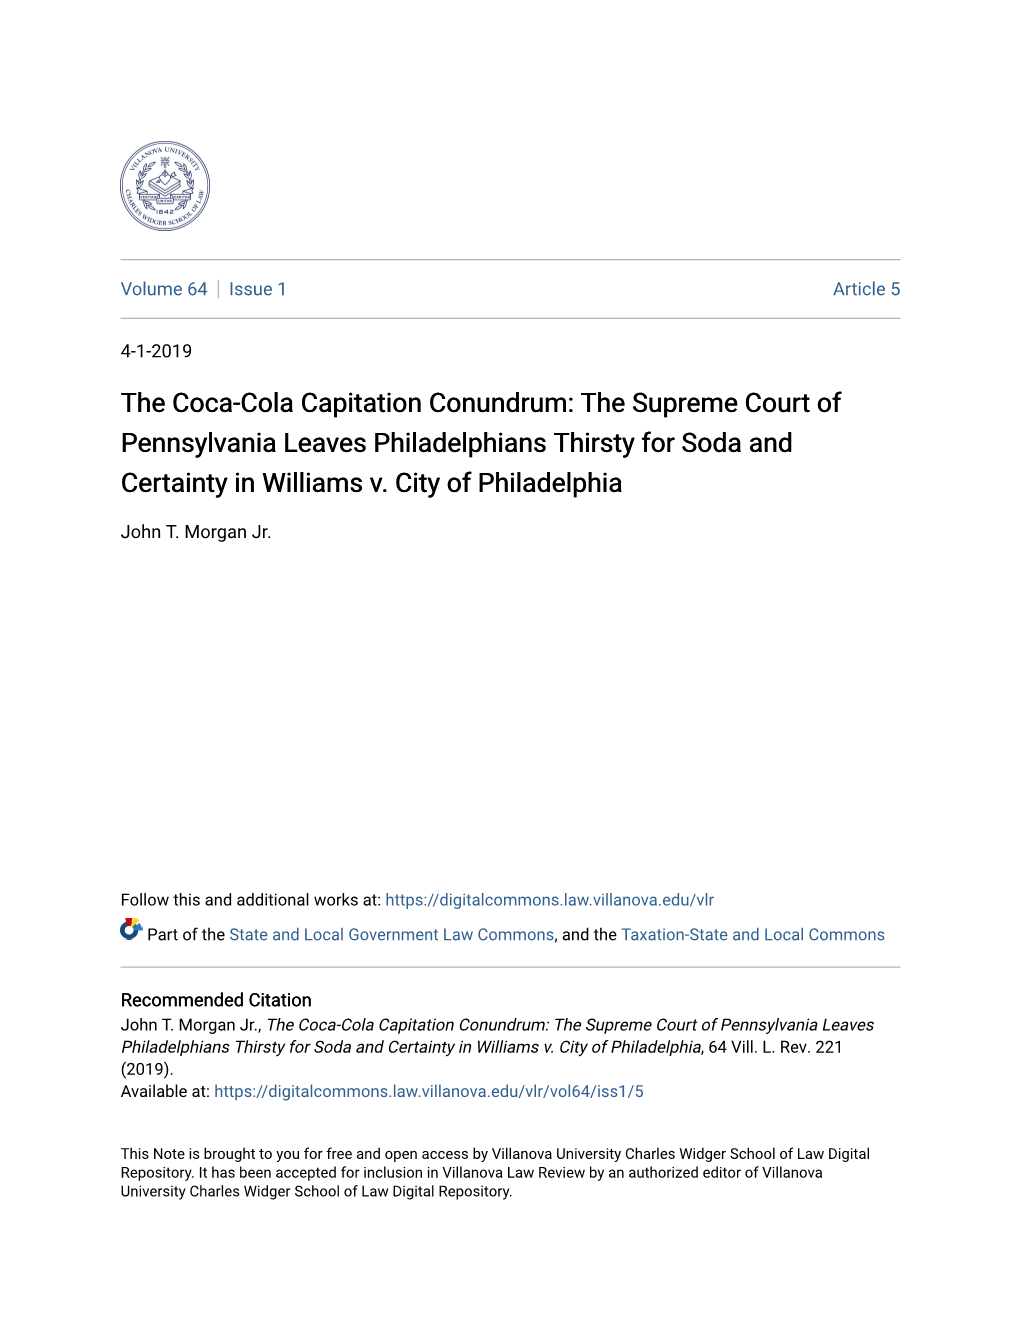 The Supreme Court of Pennsylvania Leaves Philadelphians Thirsty for Soda and Certainty in Williams V